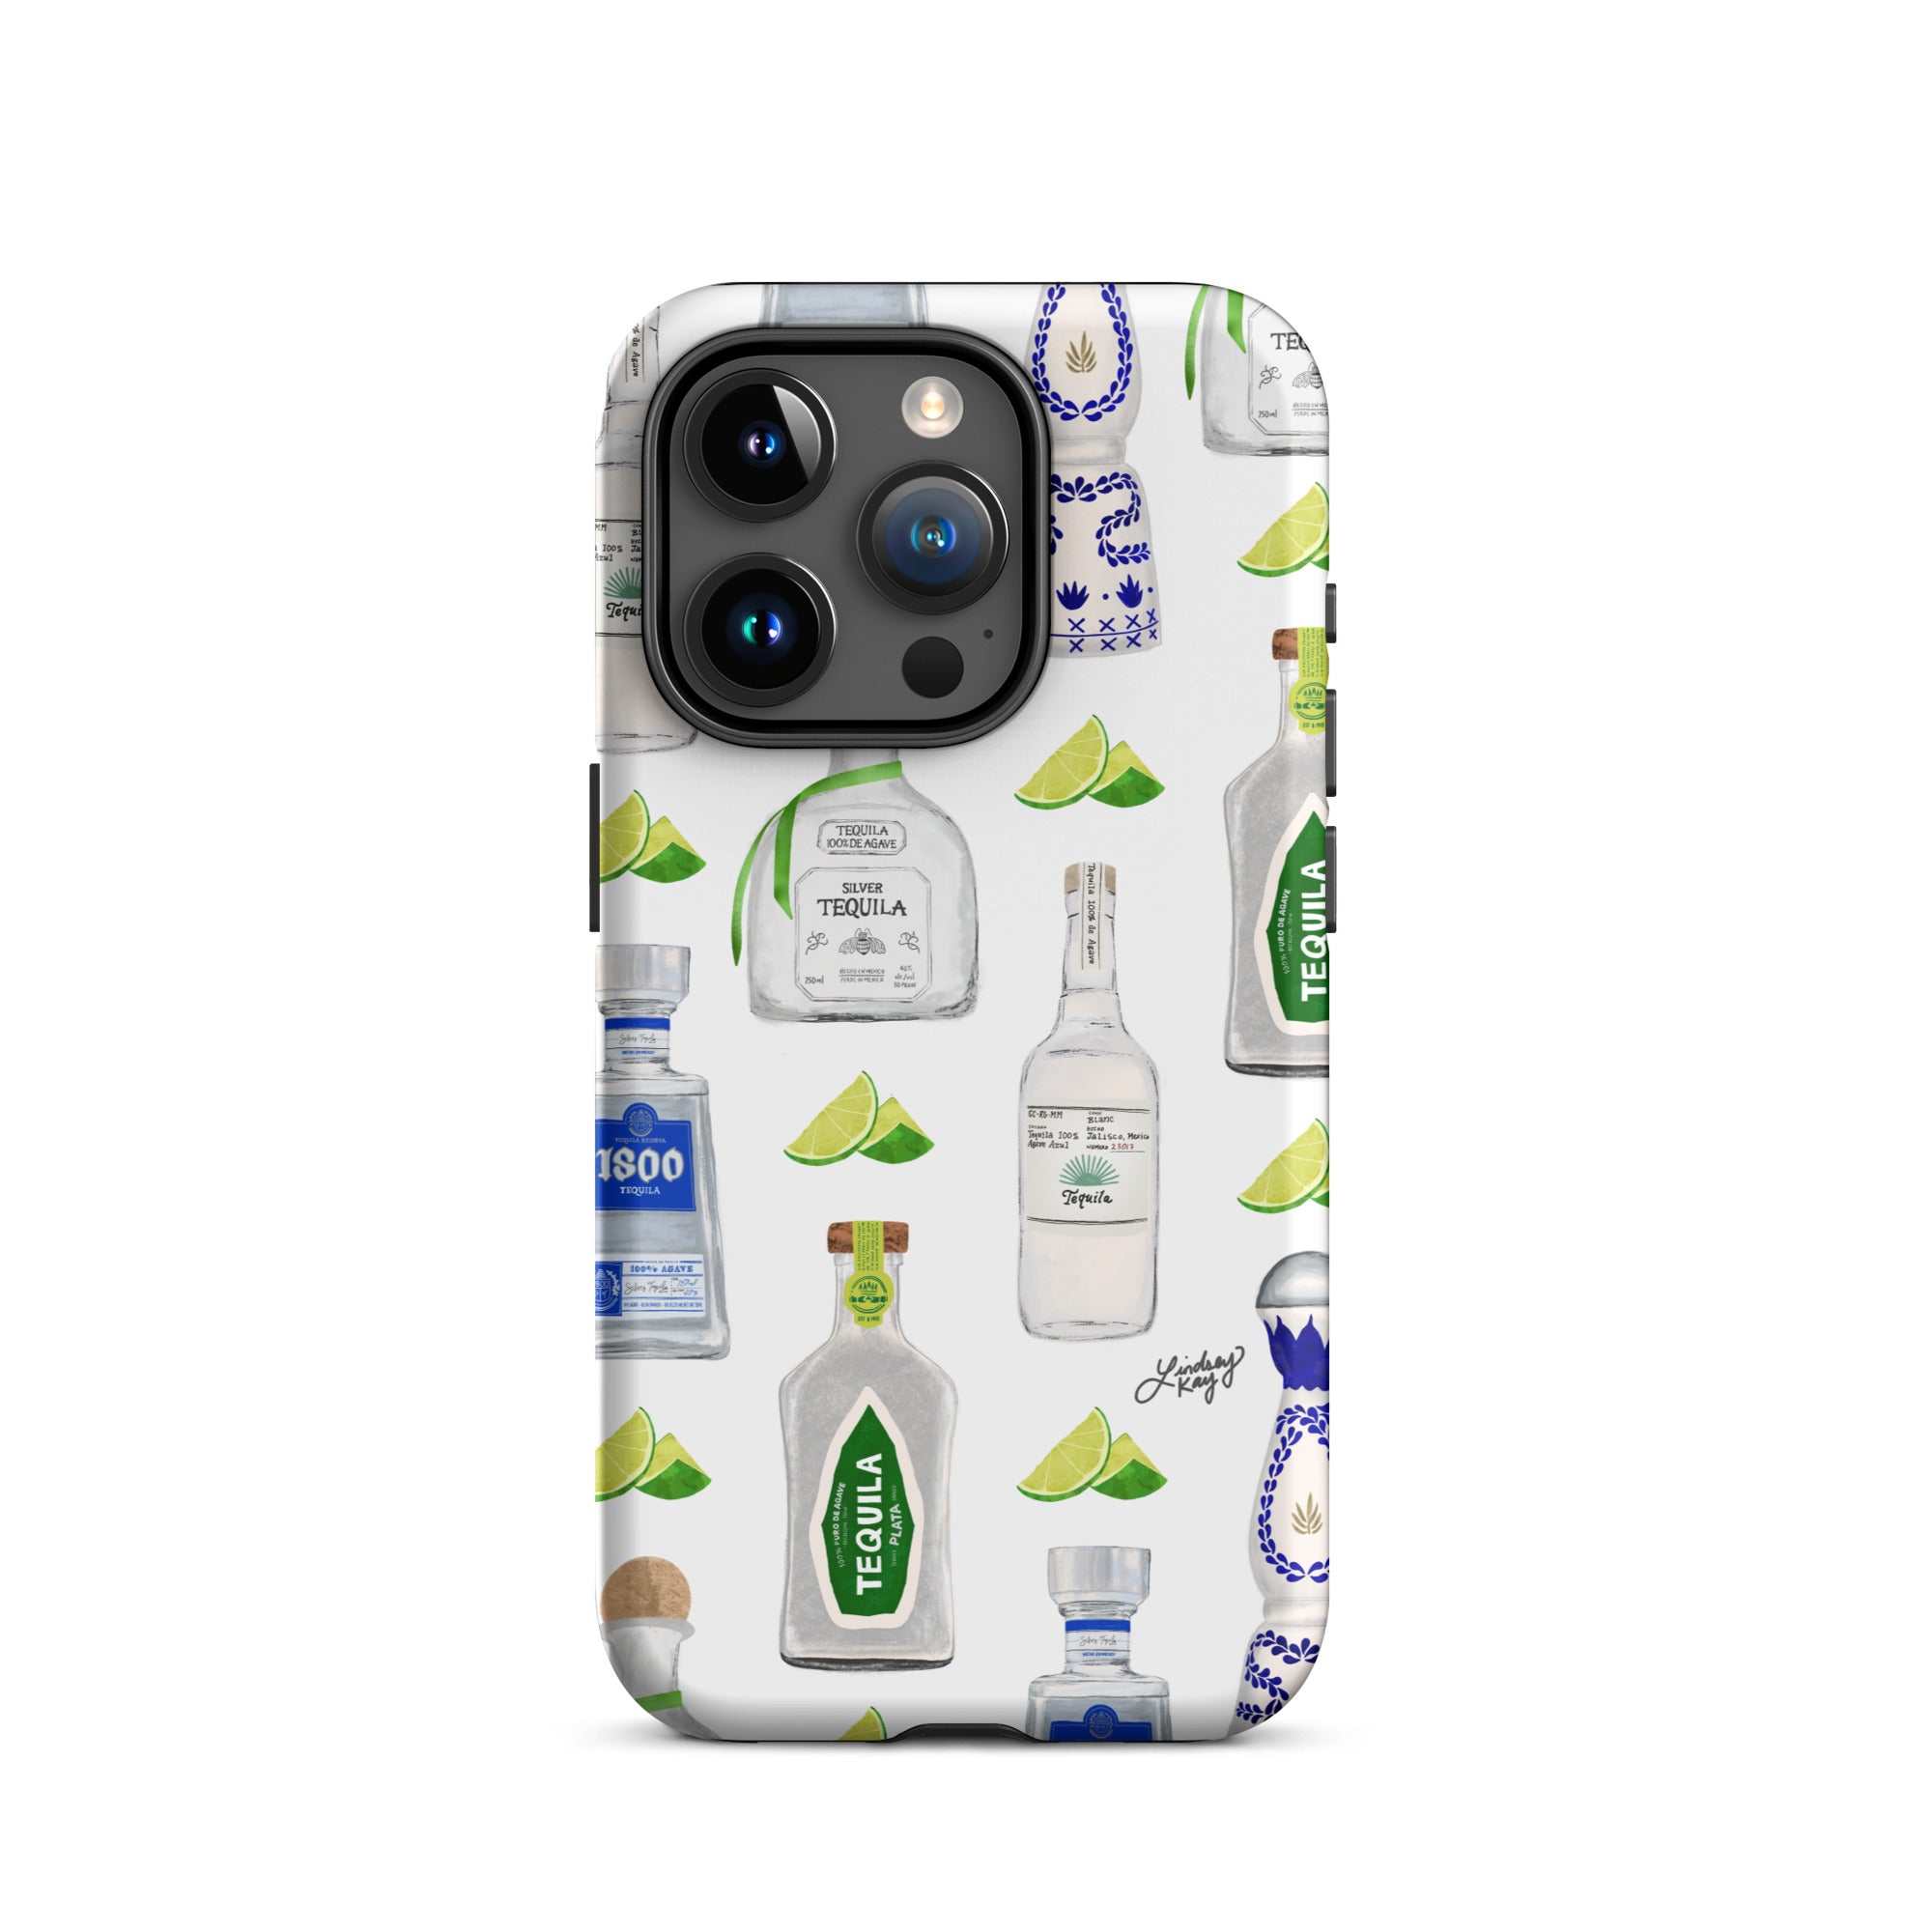 tequila bottles illustration pattern iphone tough case protector cover gift pattern 